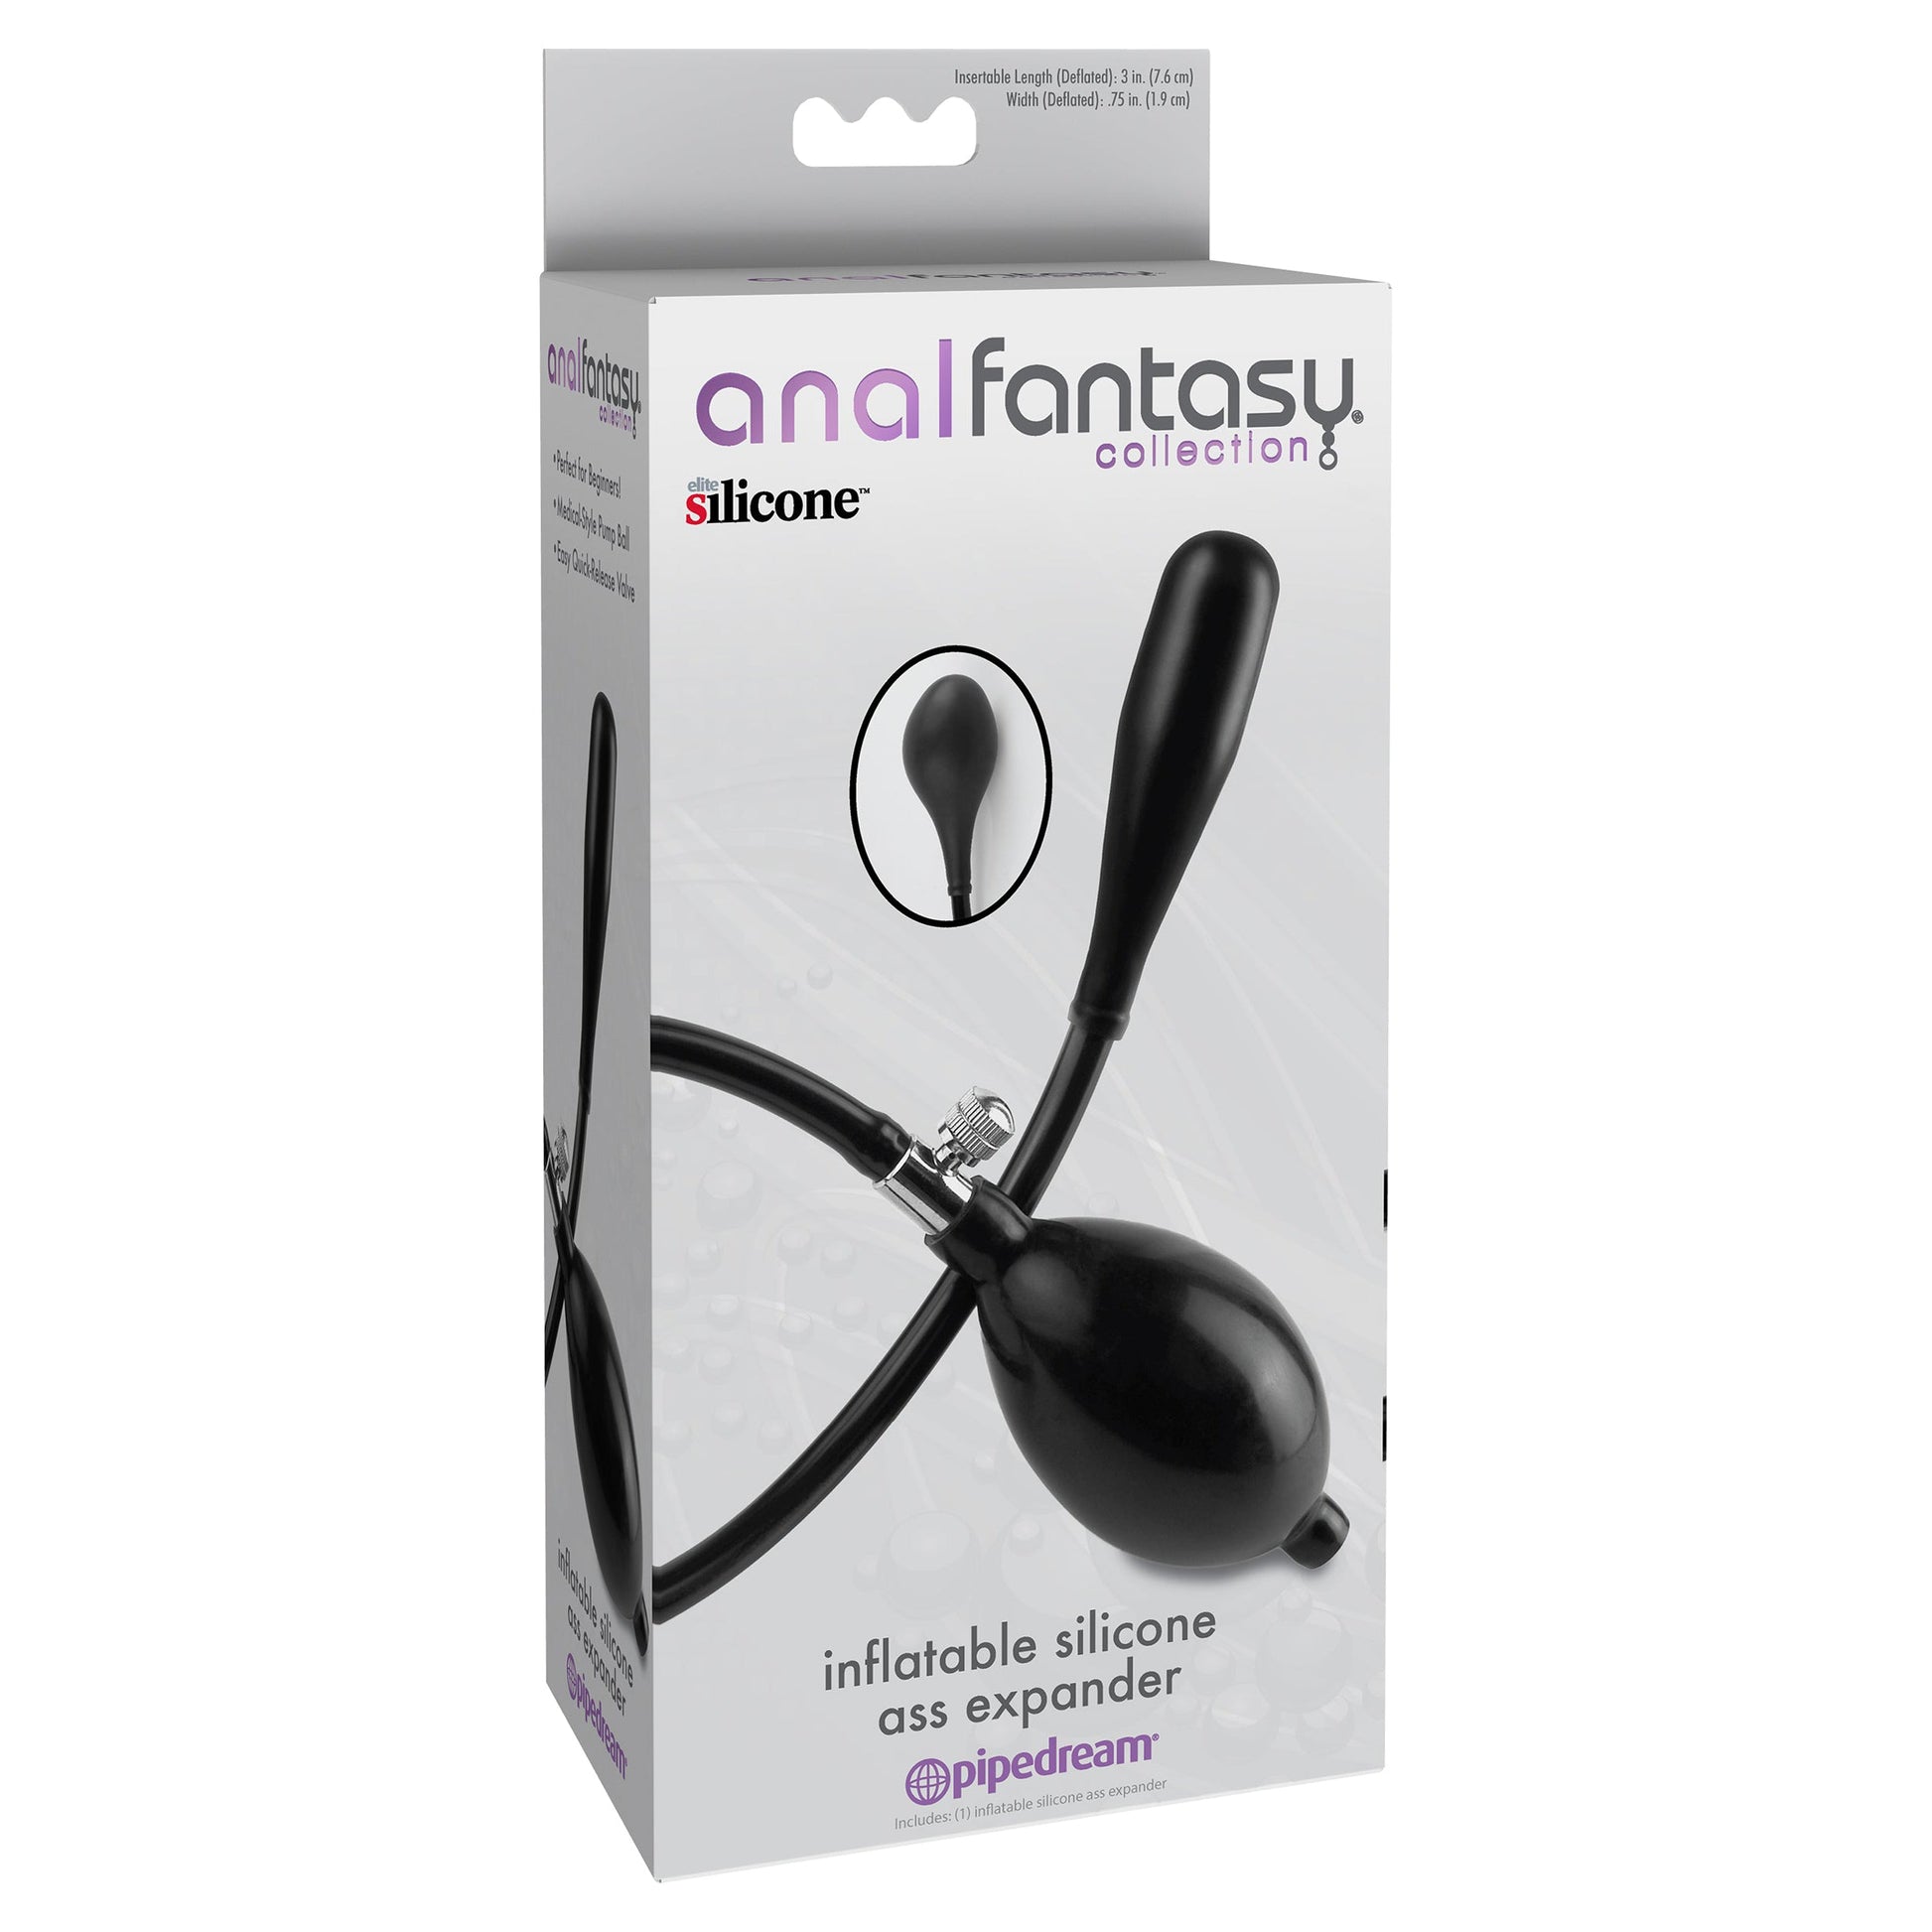 Anal Fantasy Collection Inflatable Silicone Ass Expander - Black - Thorn & Feather Sex Toy Canada